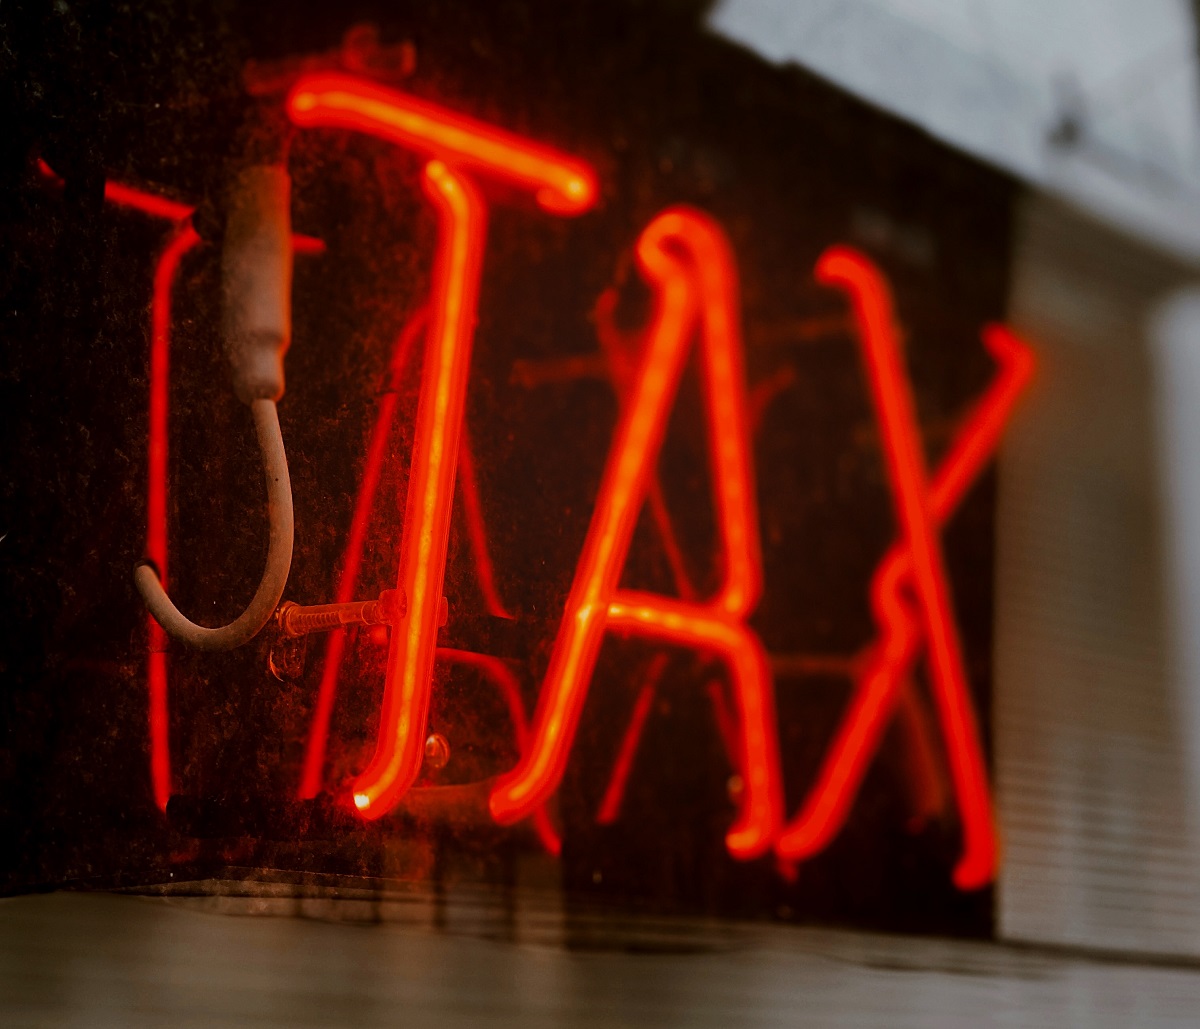 Red neon sign that says Tax